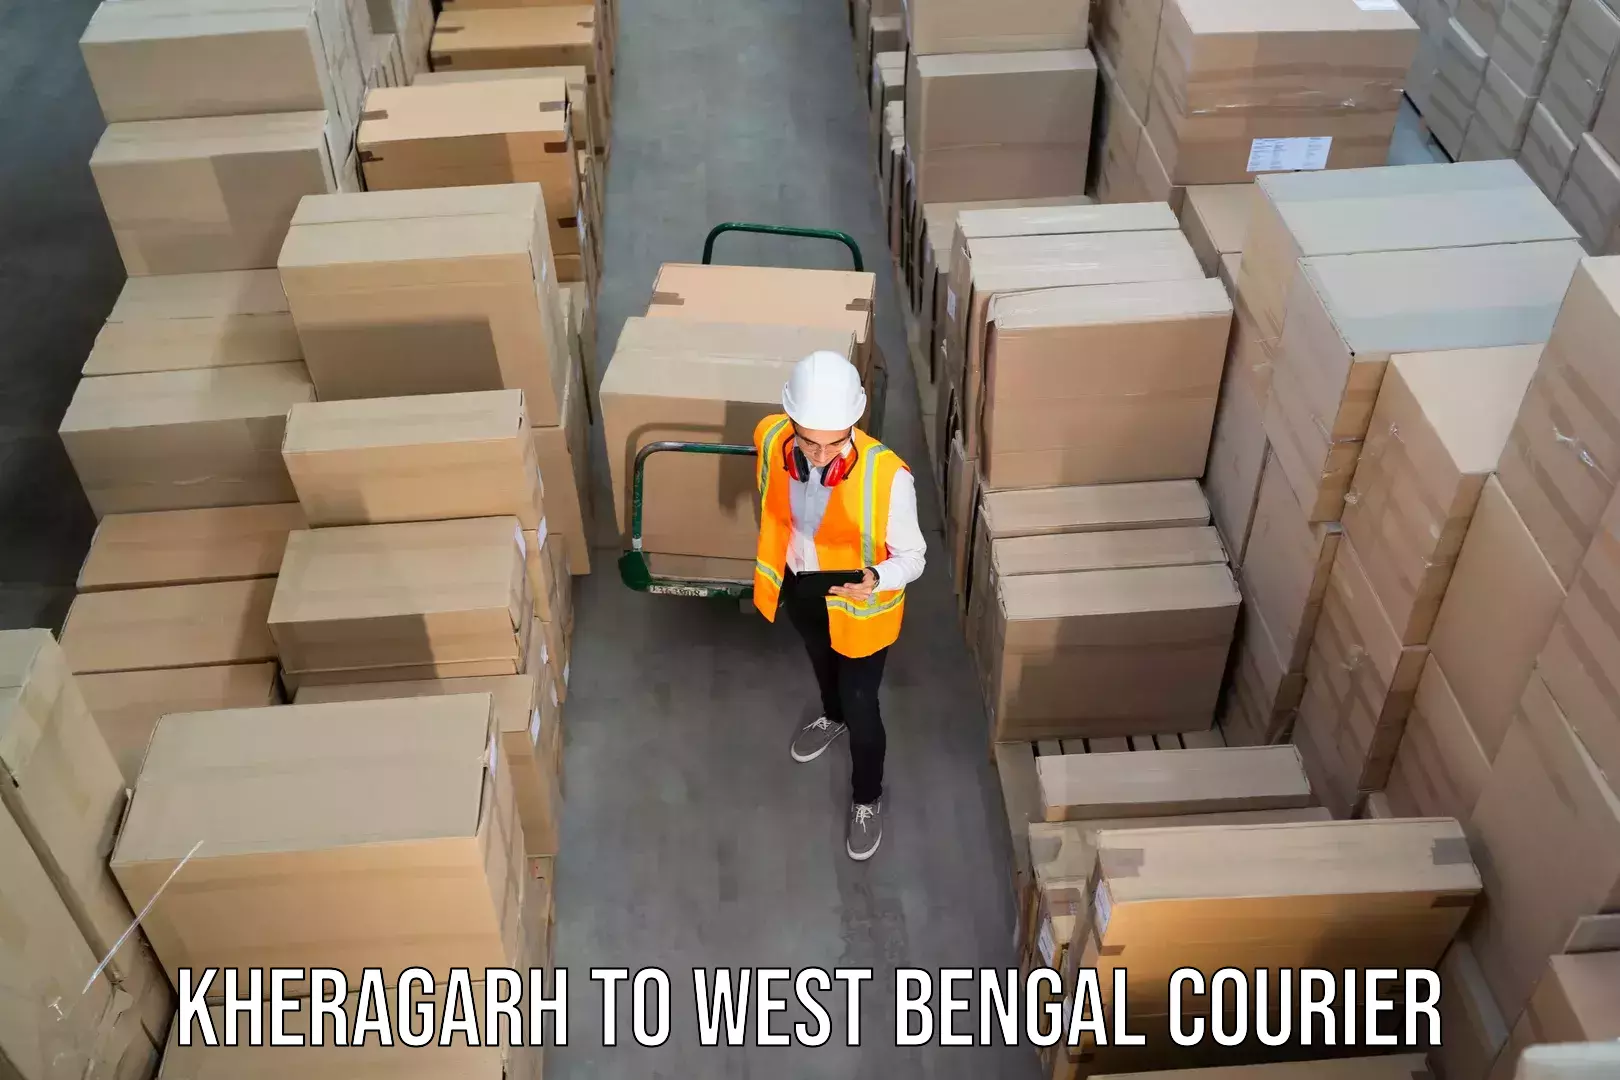 24/7 courier service Kheragarh to West Bengal